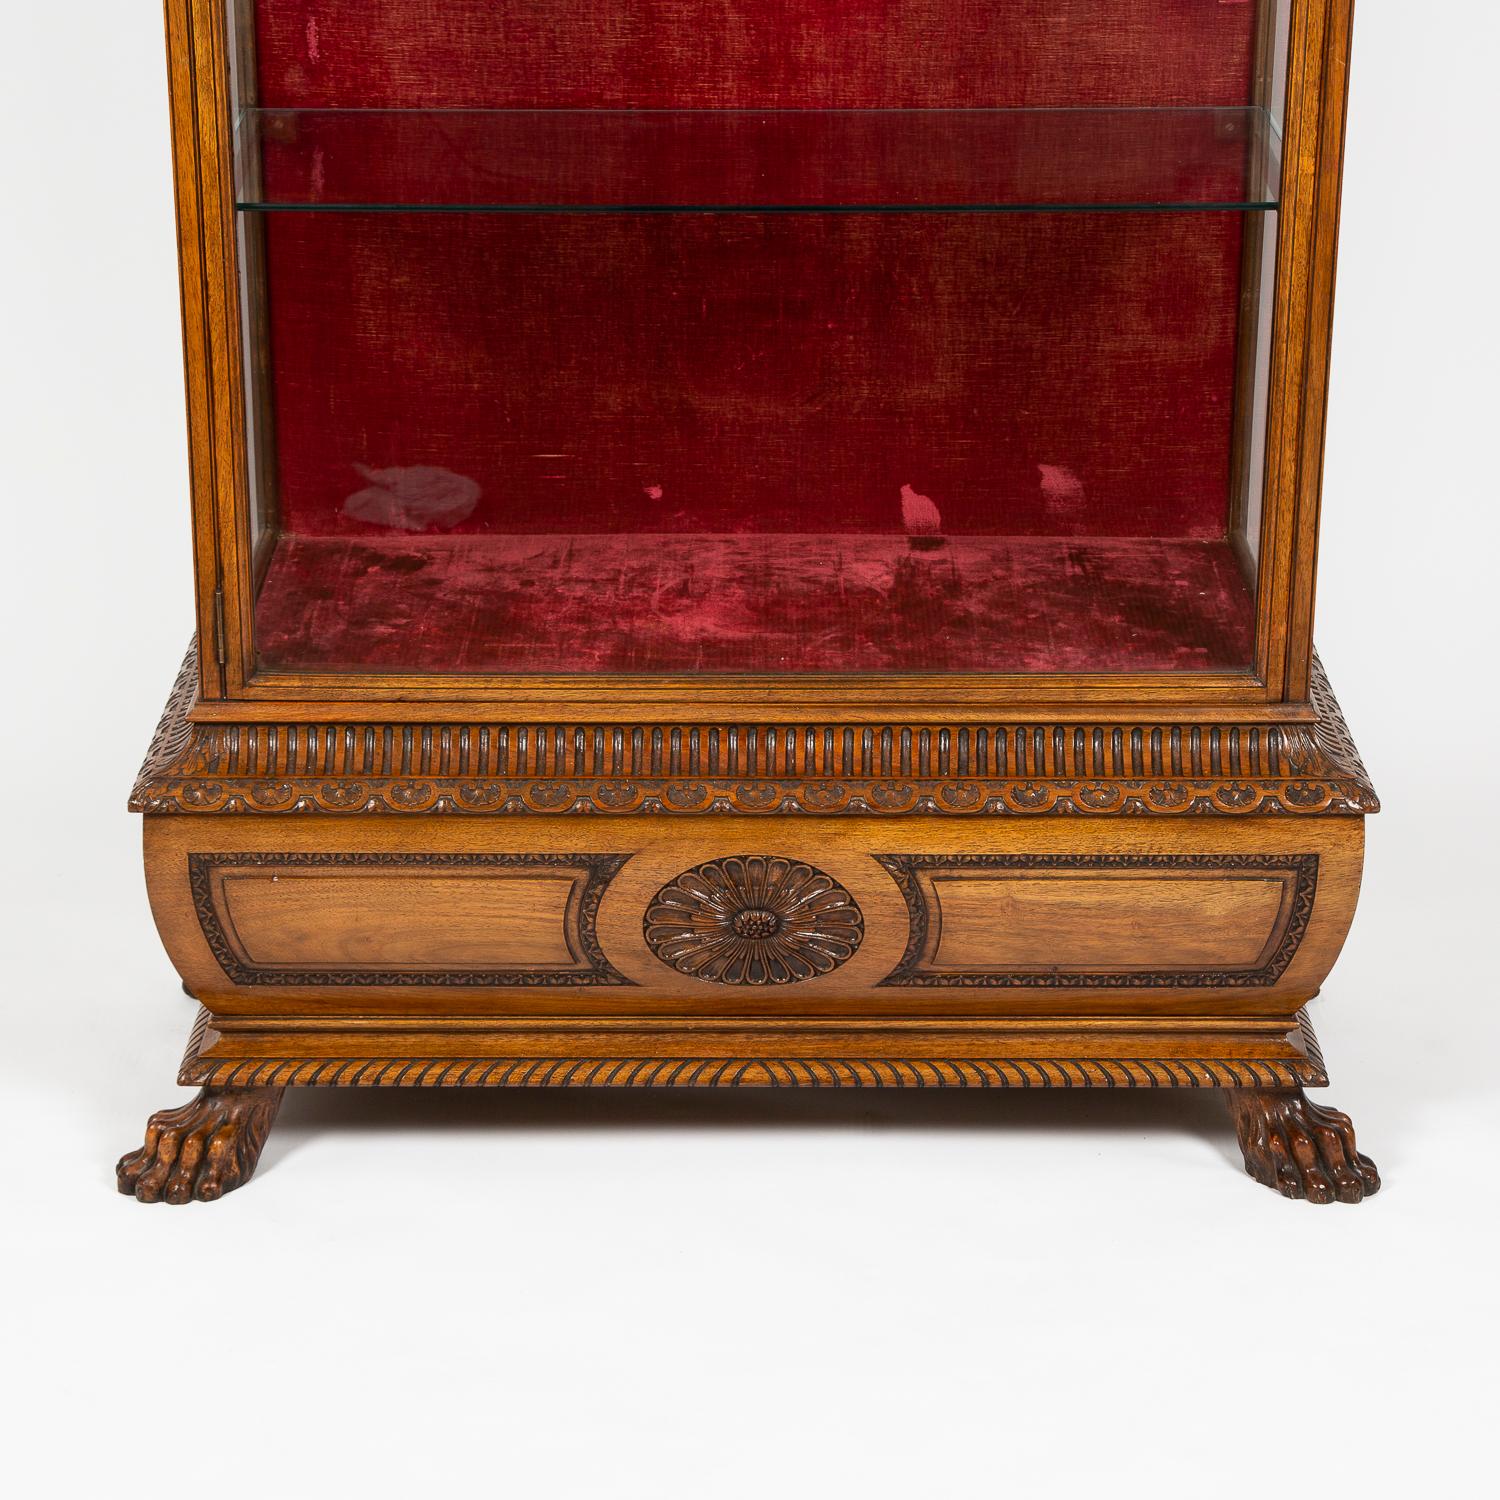 Large Carved Velvet Lined Walnut Display Case, with Internal Glass Shelving In Good Condition For Sale In London, GB